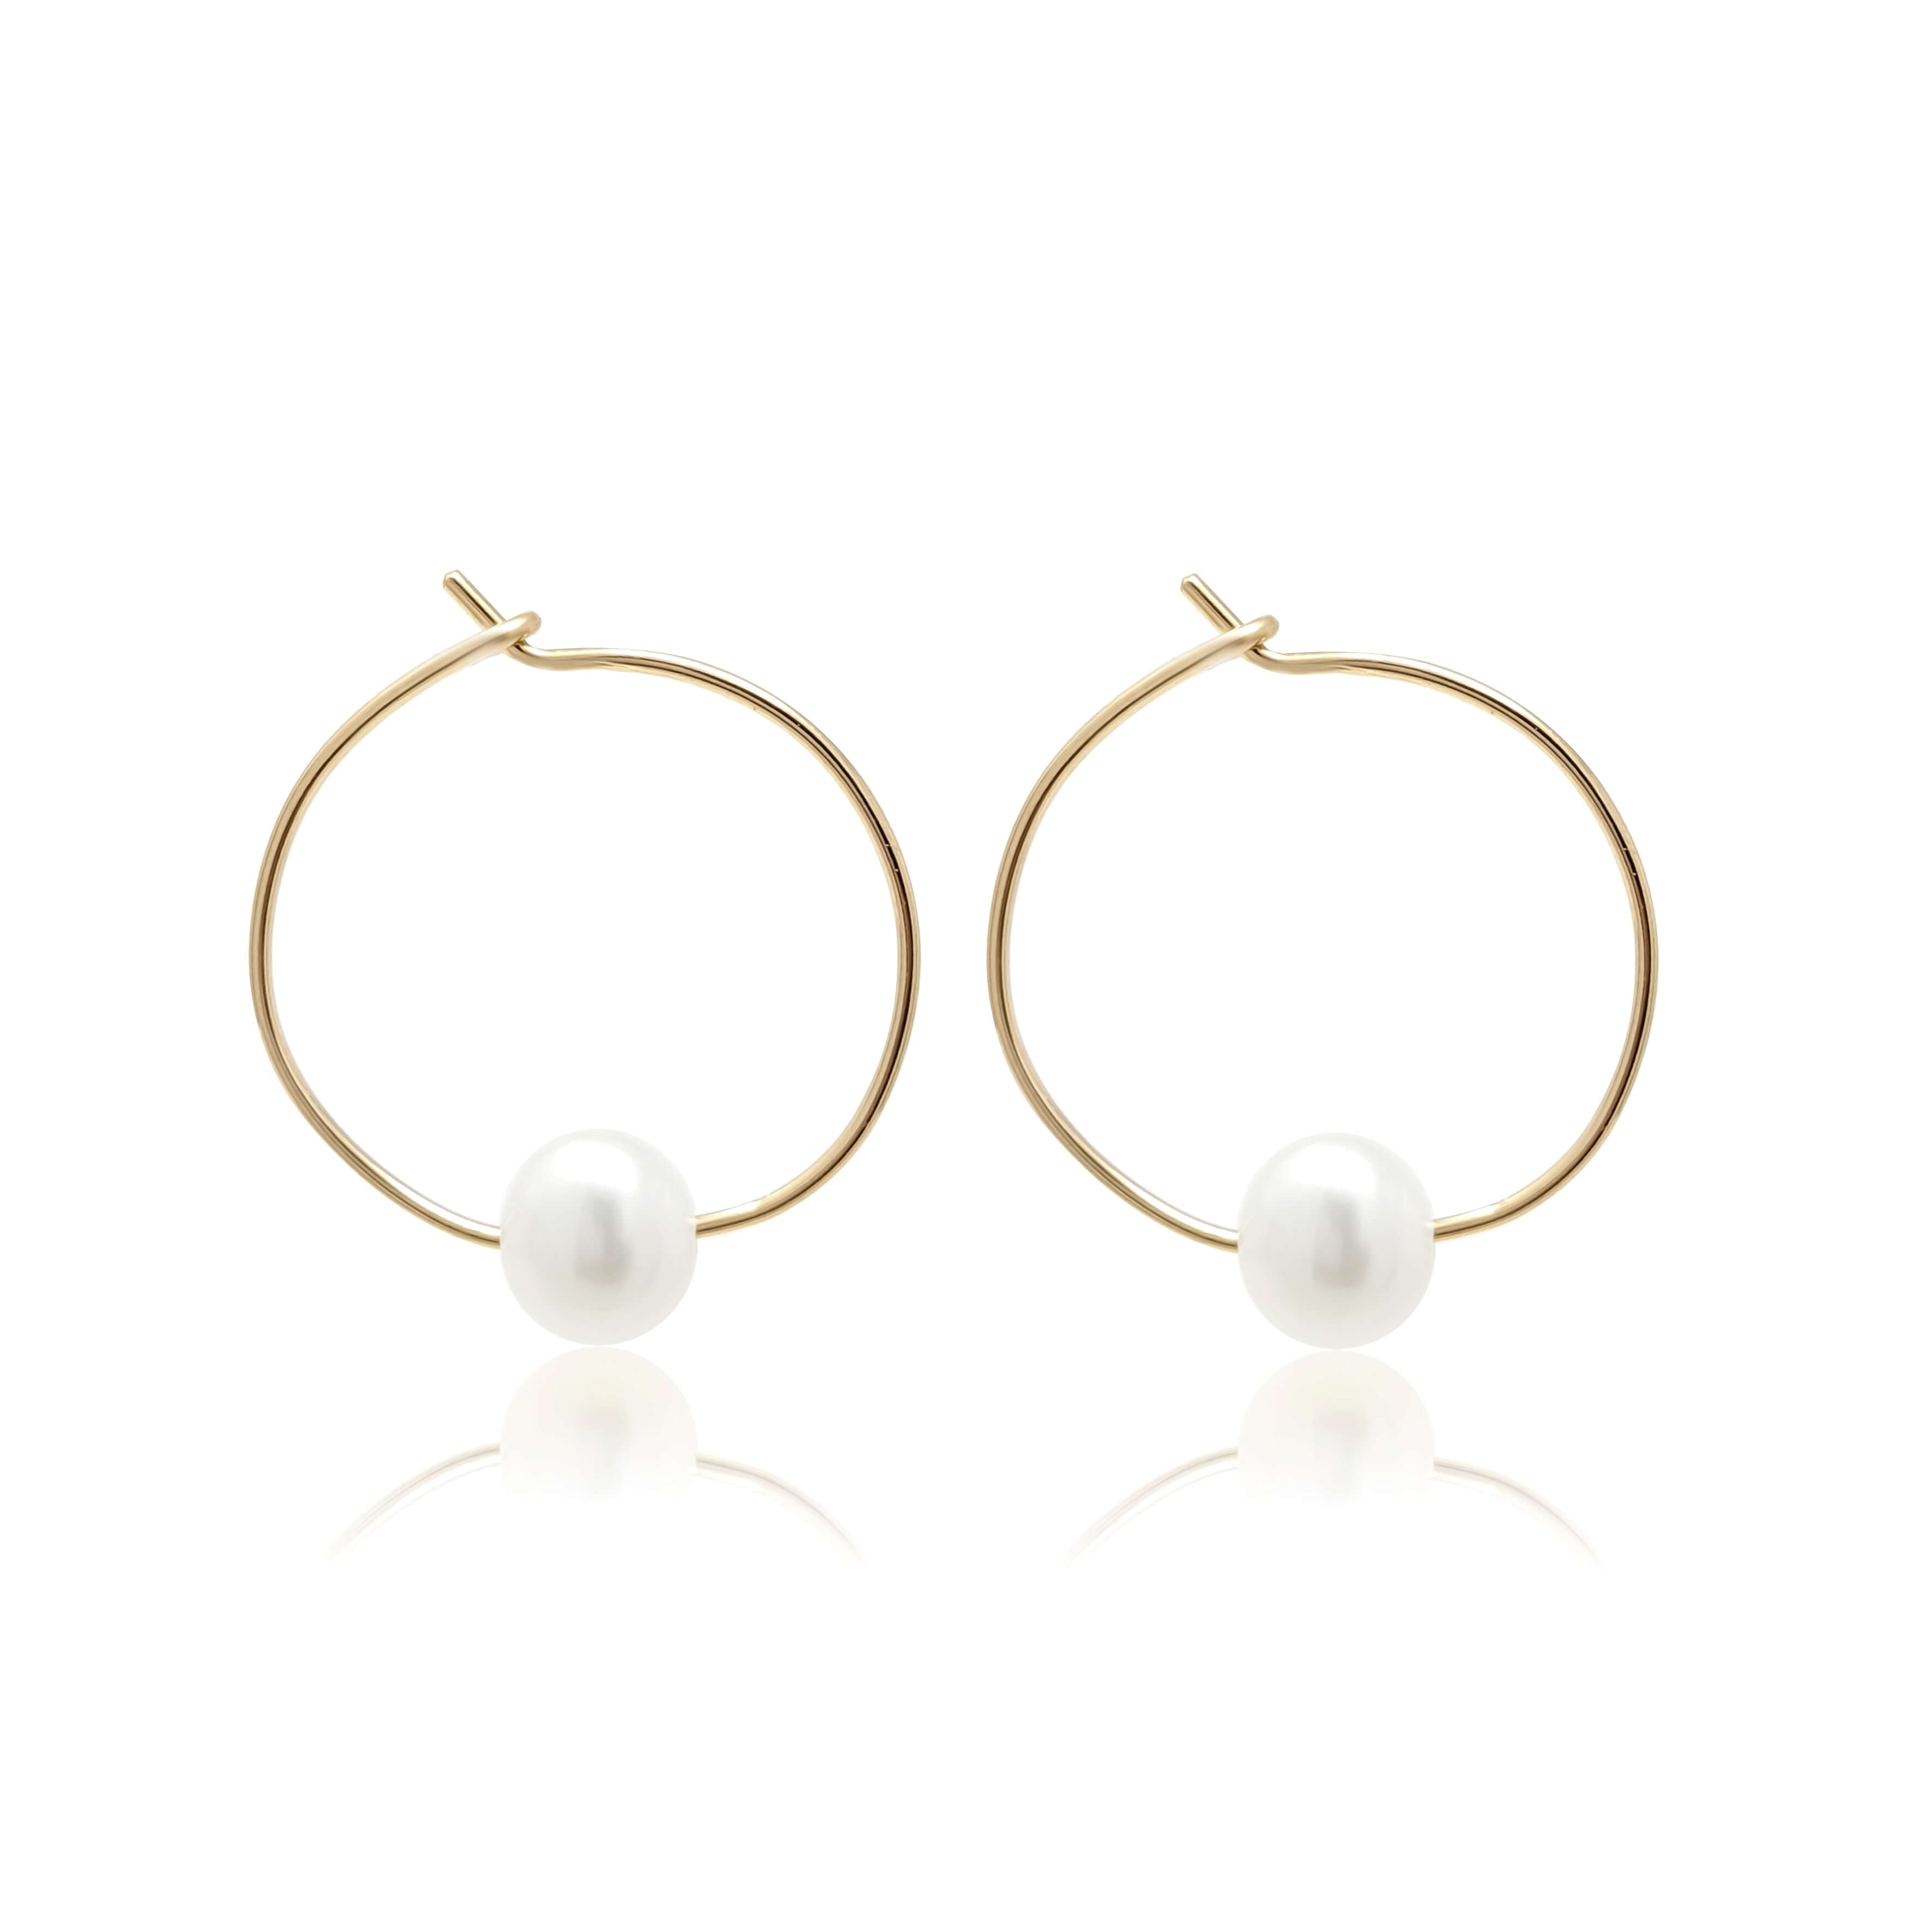 wire earrings on white background in gold filled